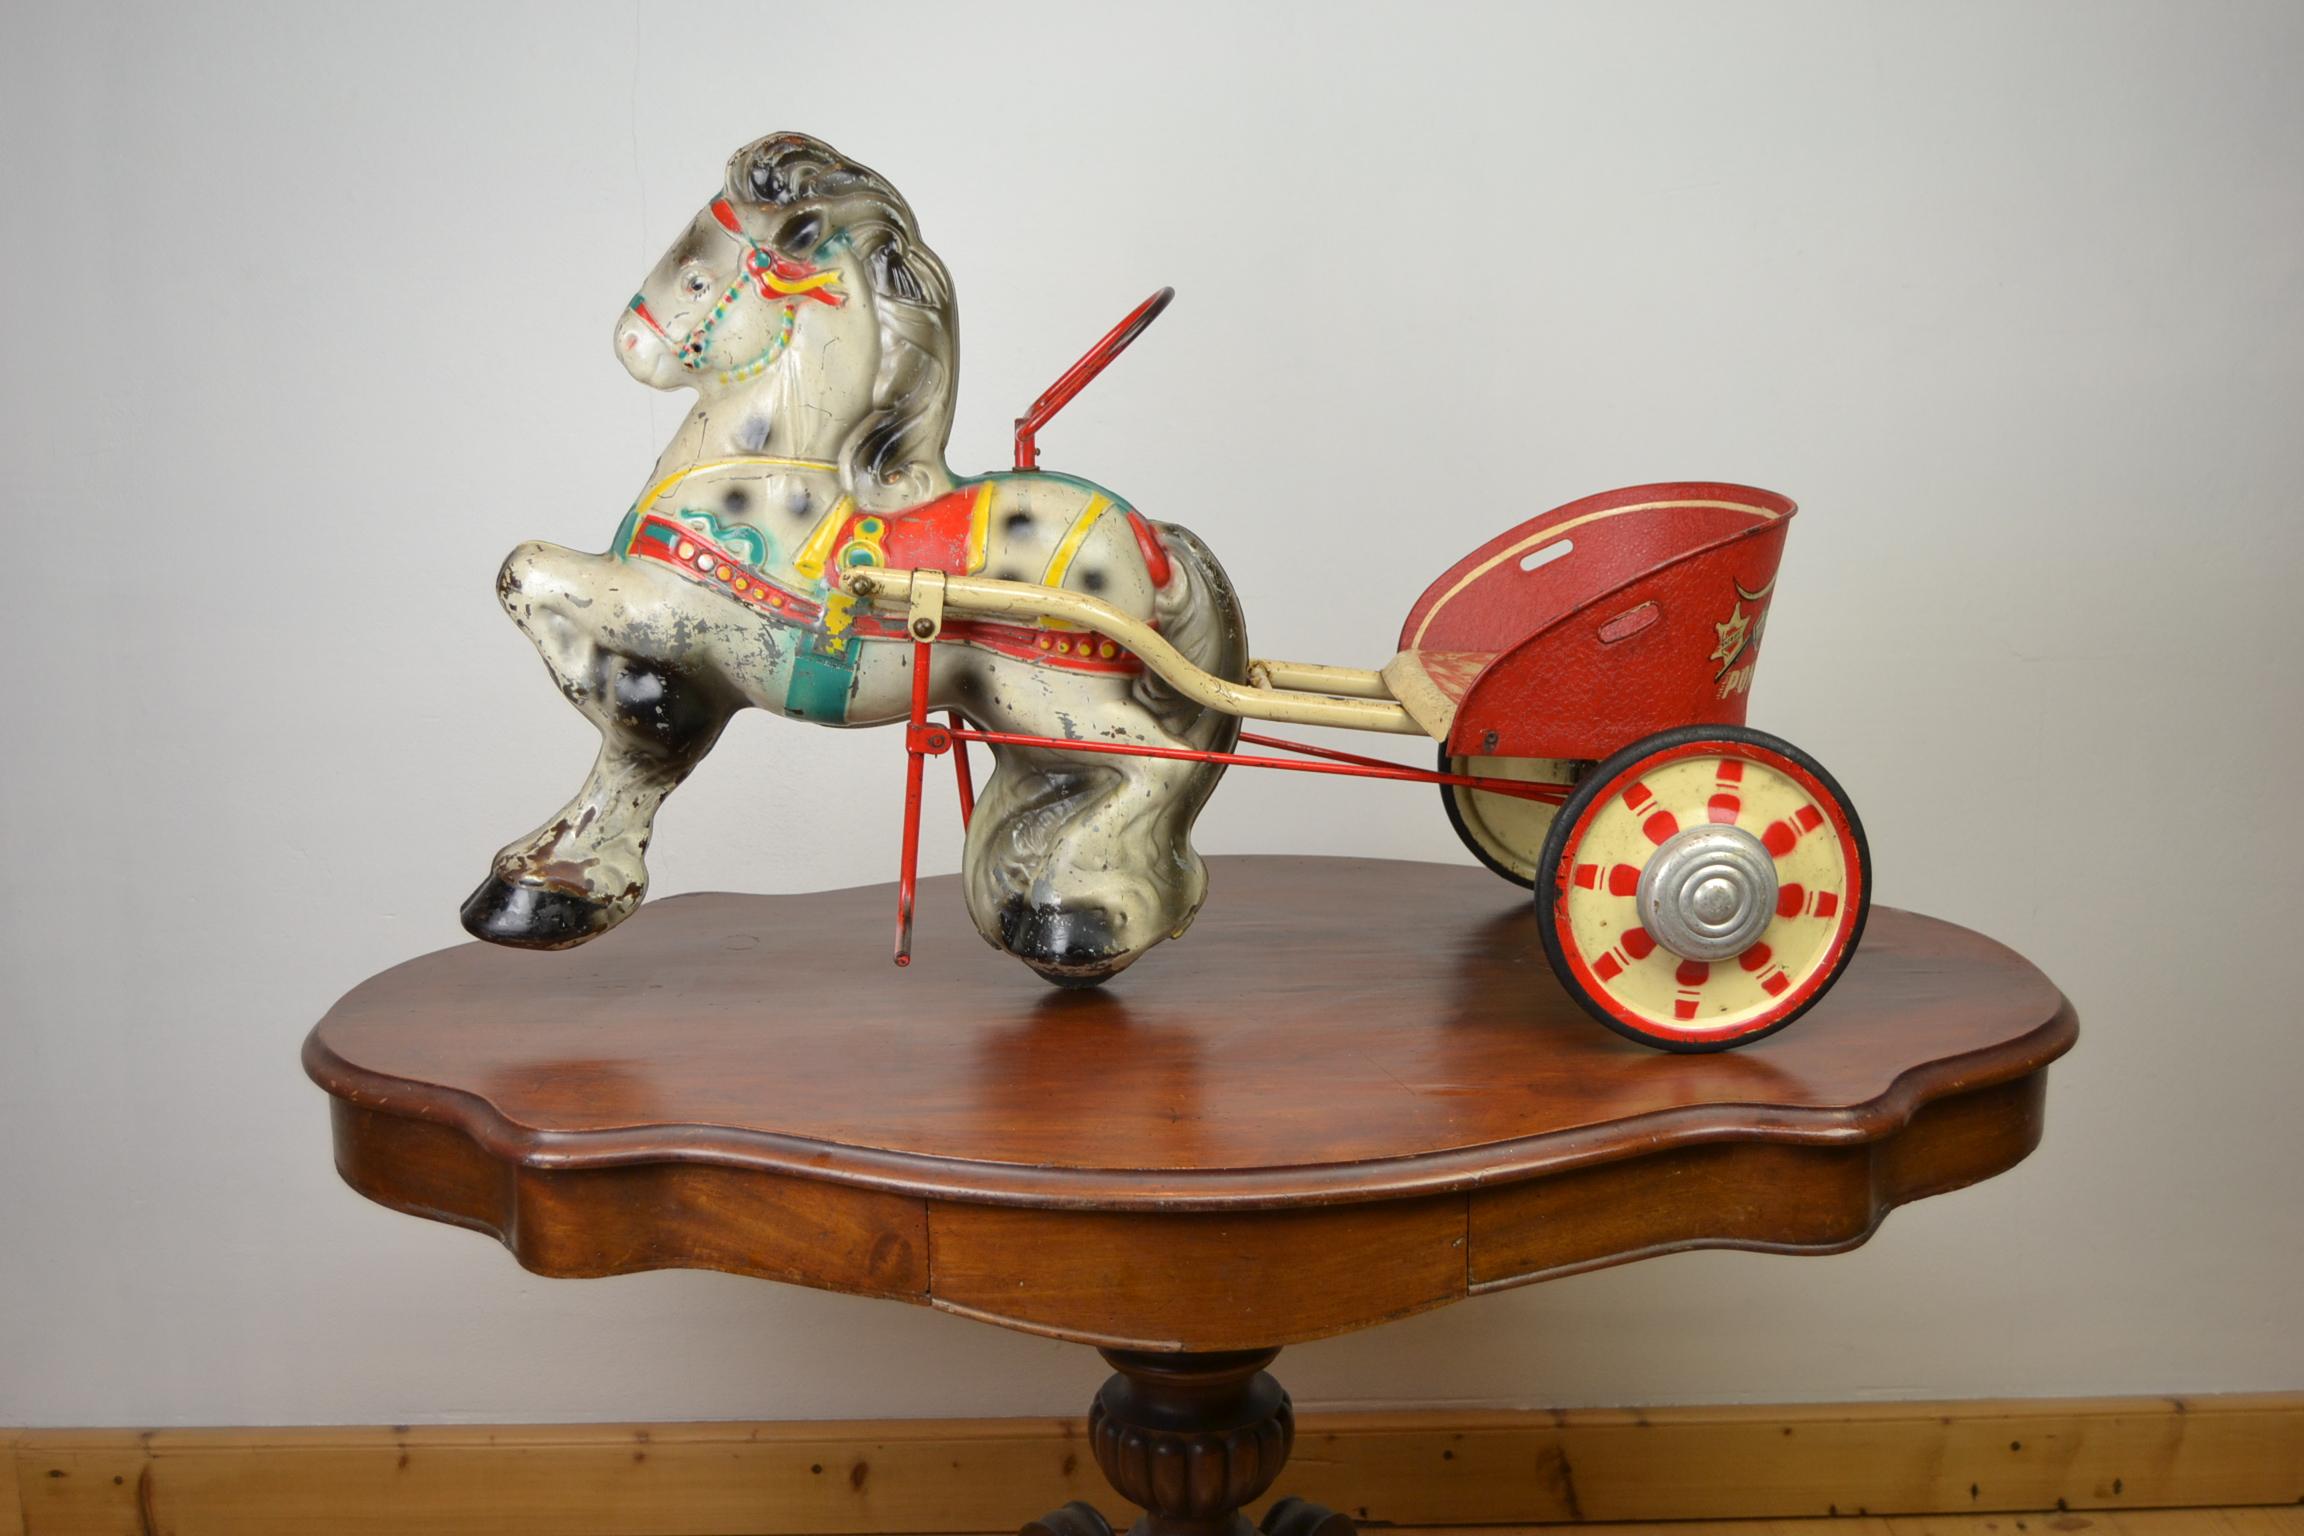 1950s Sebel Mobo Toys Pony Express Pedal Toy, Pressed Steel, U.K. For Sale 4